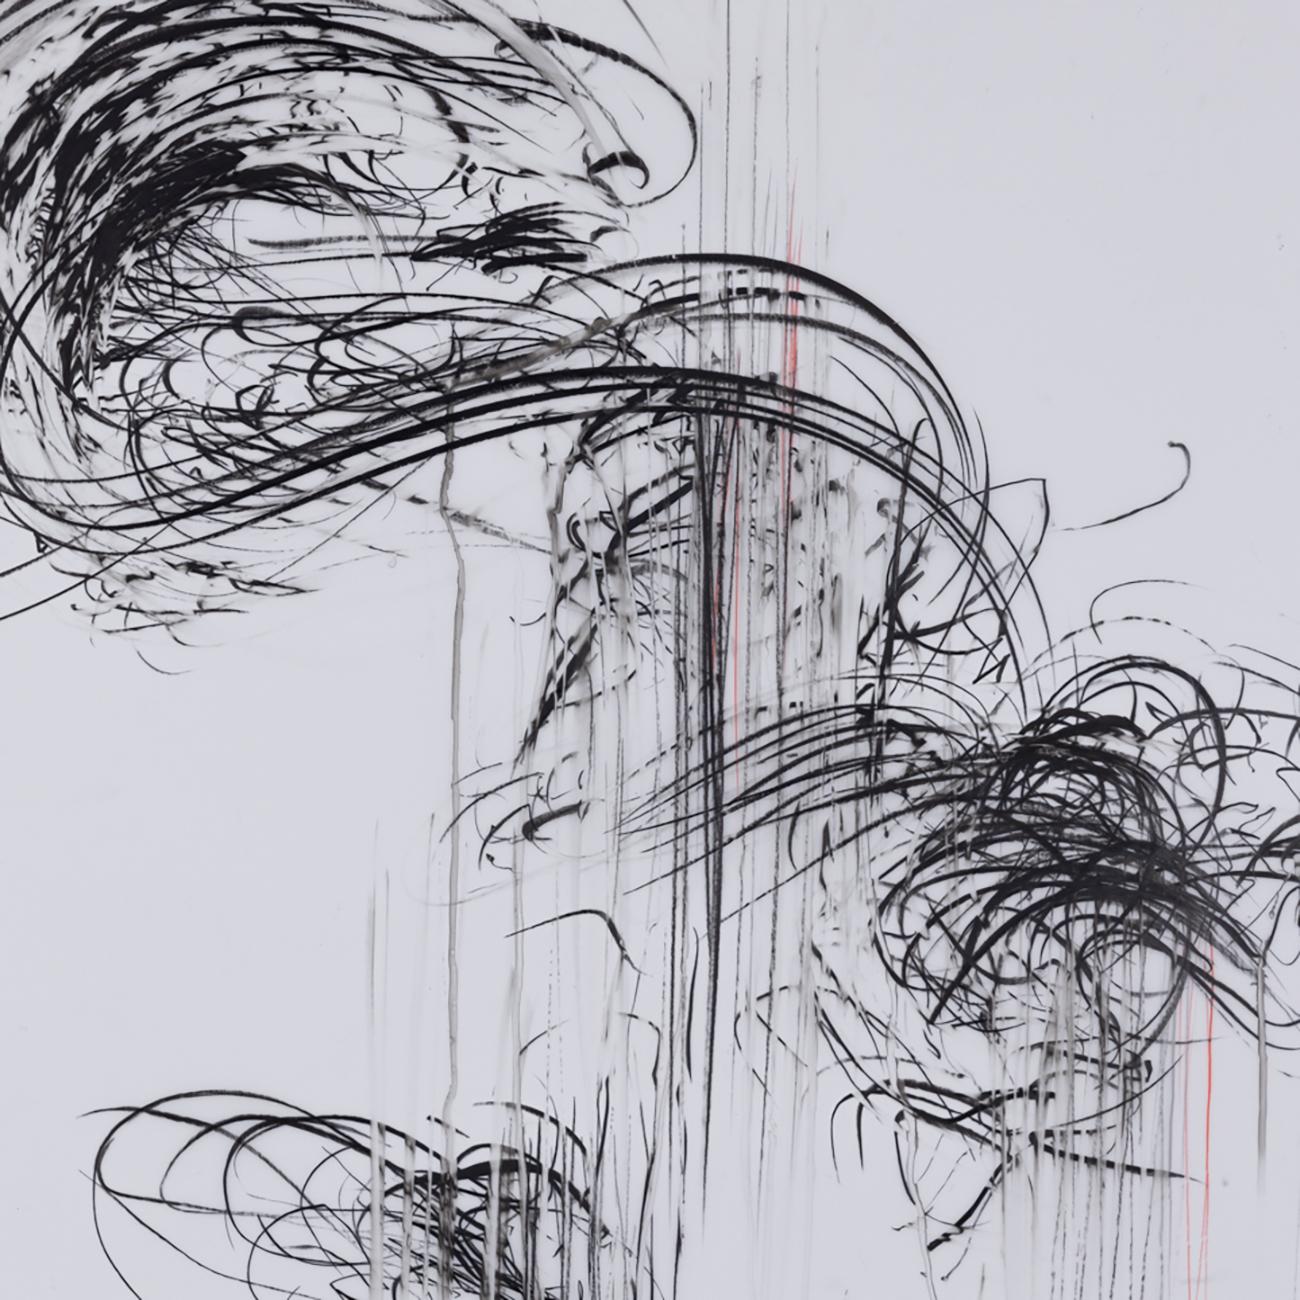 Gushing 3 (Abstract drawing) - Abstract Expressionist Art by Jaanika Peerna